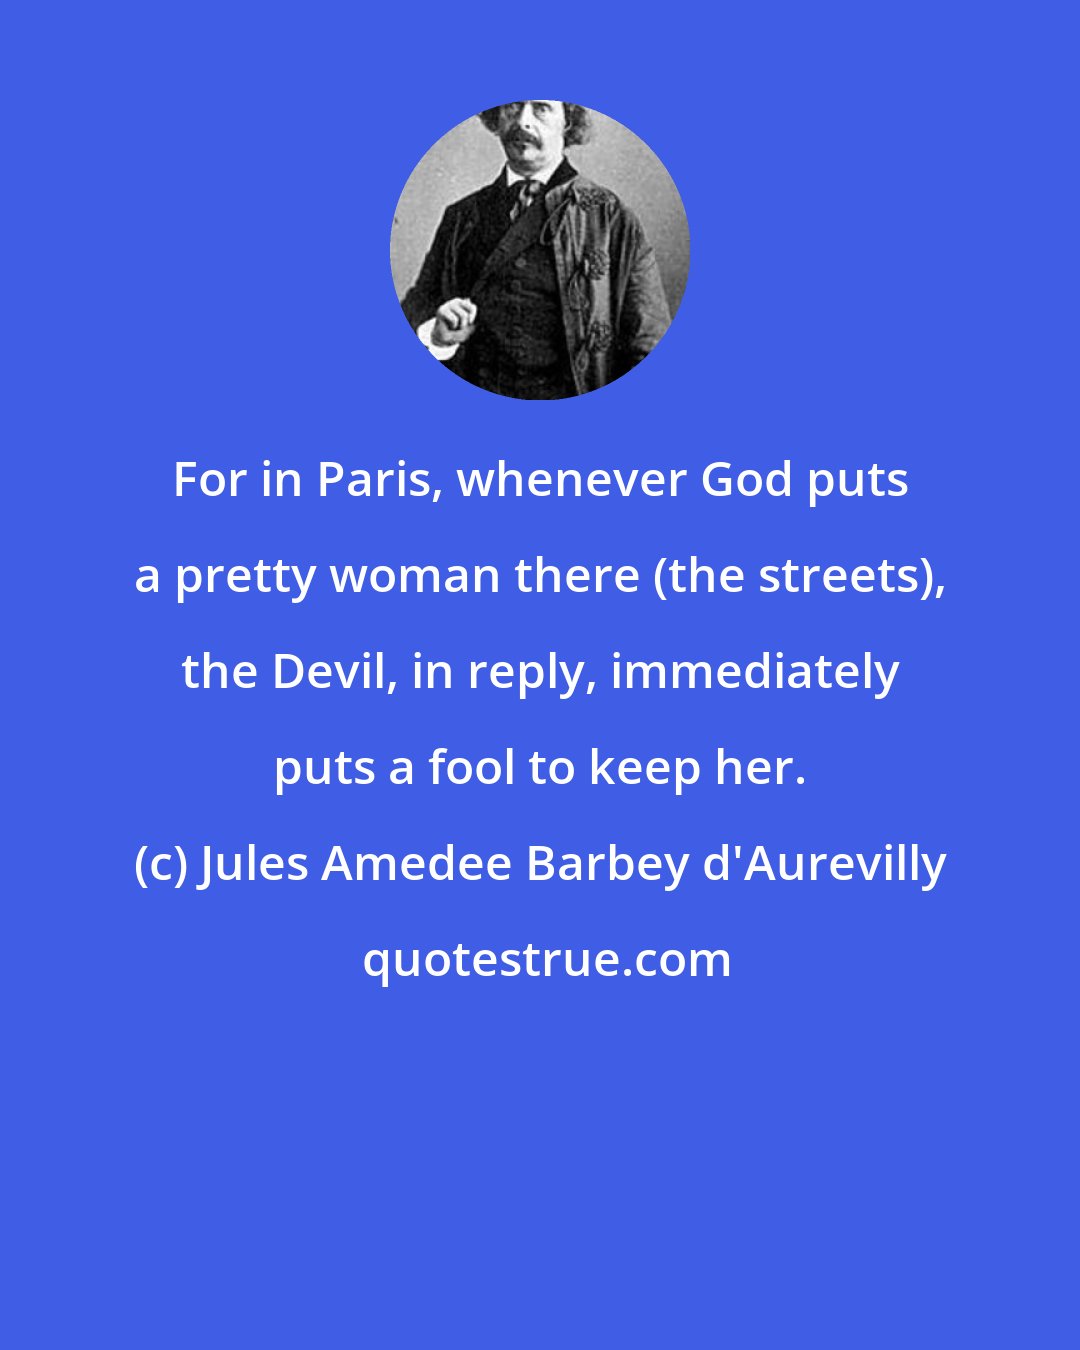 Jules Amedee Barbey d'Aurevilly: For in Paris, whenever God puts a pretty woman there (the streets), the Devil, in reply, immediately puts a fool to keep her.